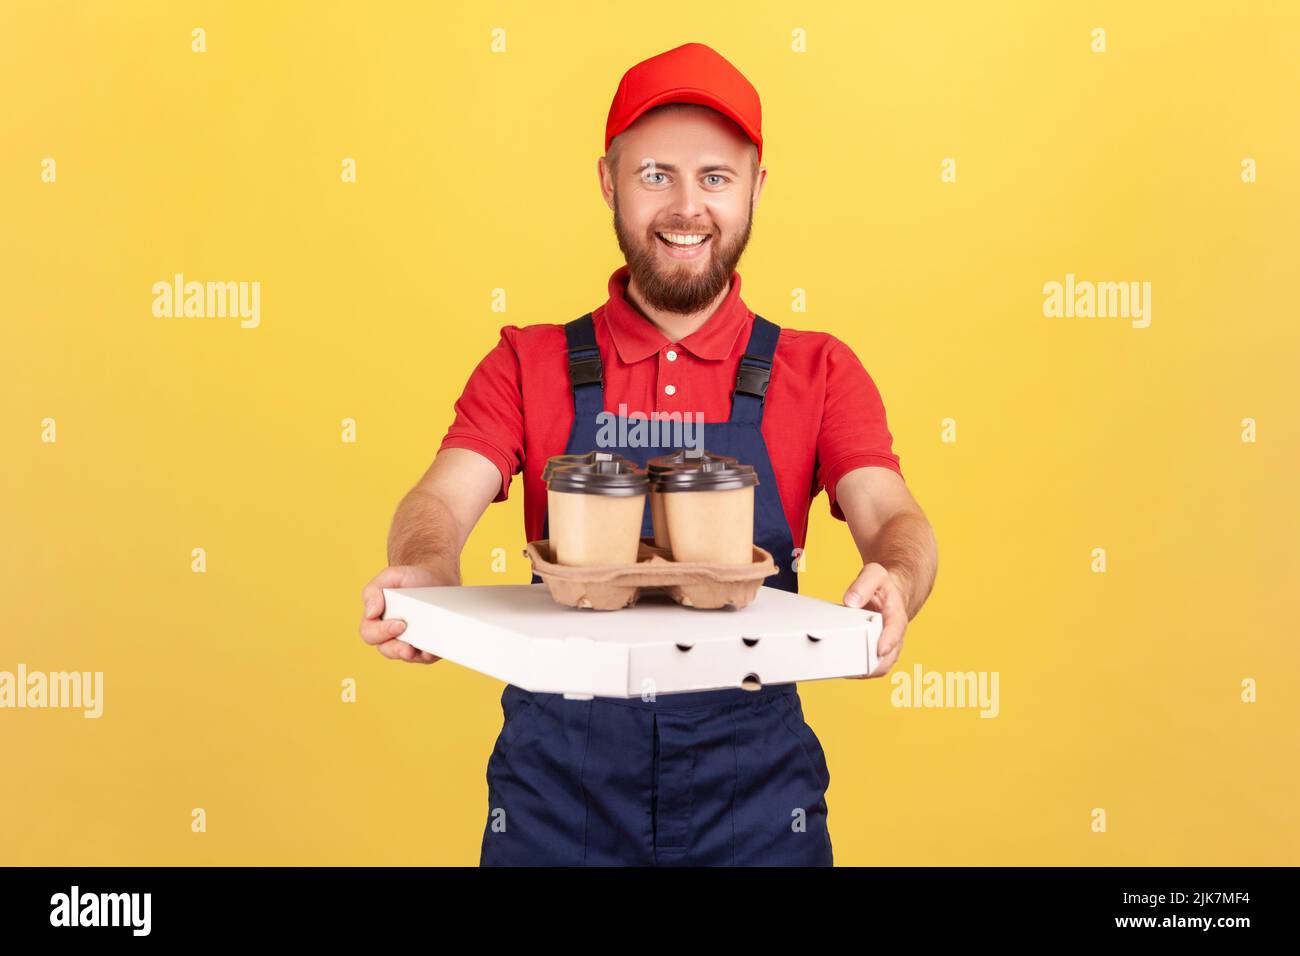 Portrait of smiling professional courier wearing blue overalls standing with pizza box and coffee in disposable cup, fast food delivery service. Indoor studio shot isolated on yellow background. Stock Photo